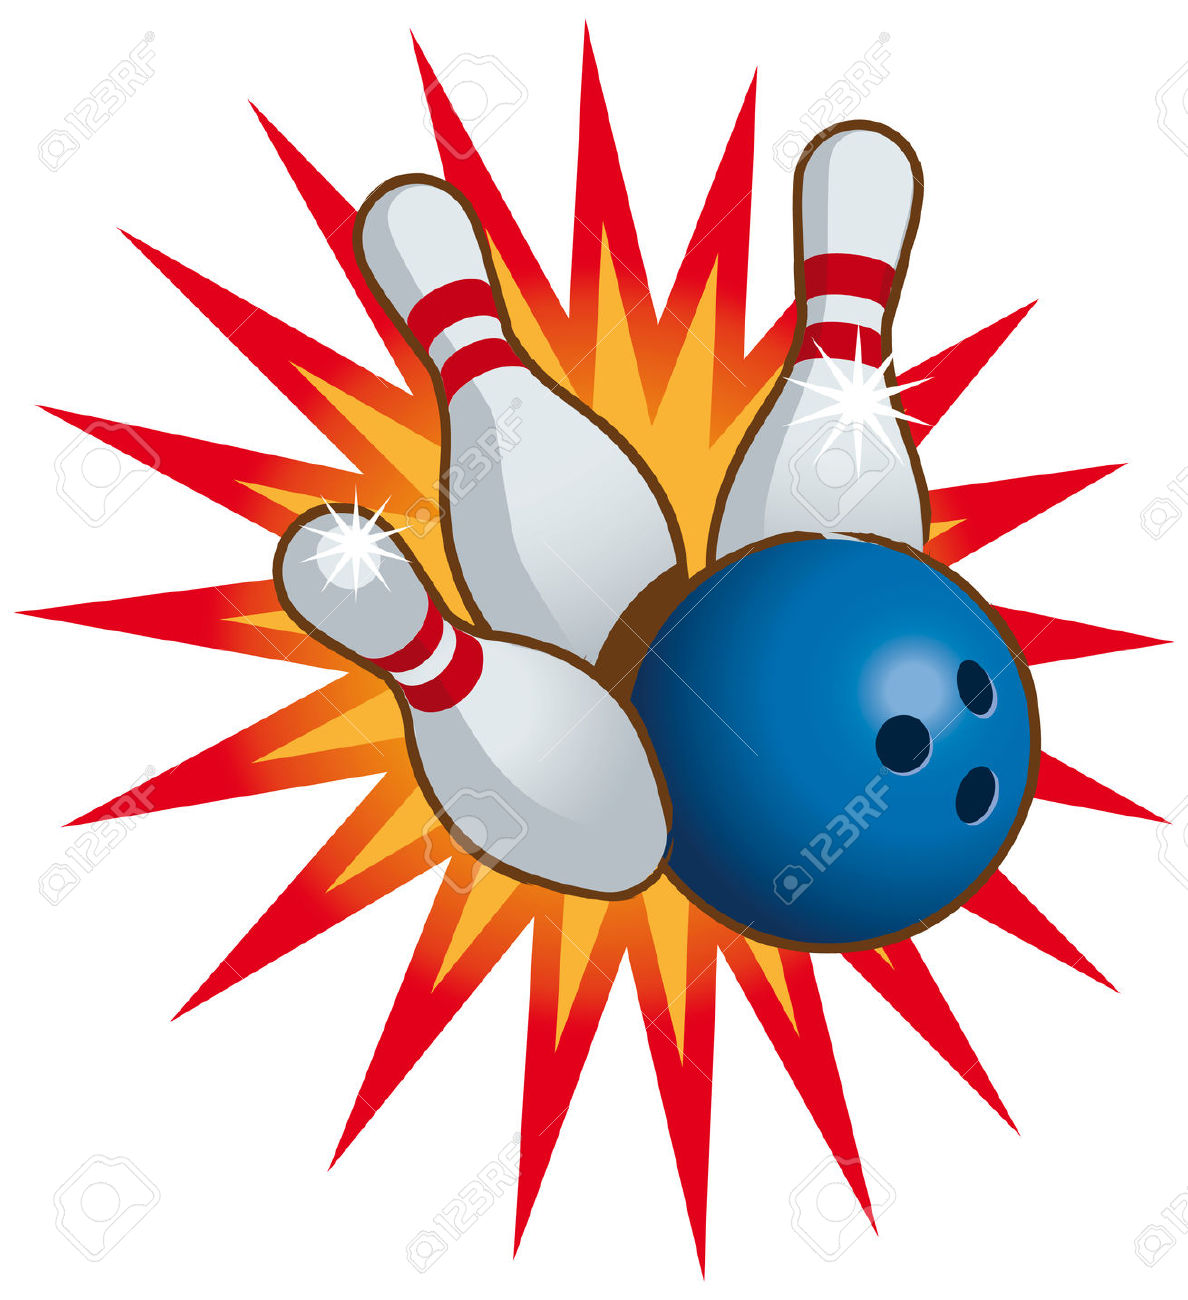 Bowling clipart free.